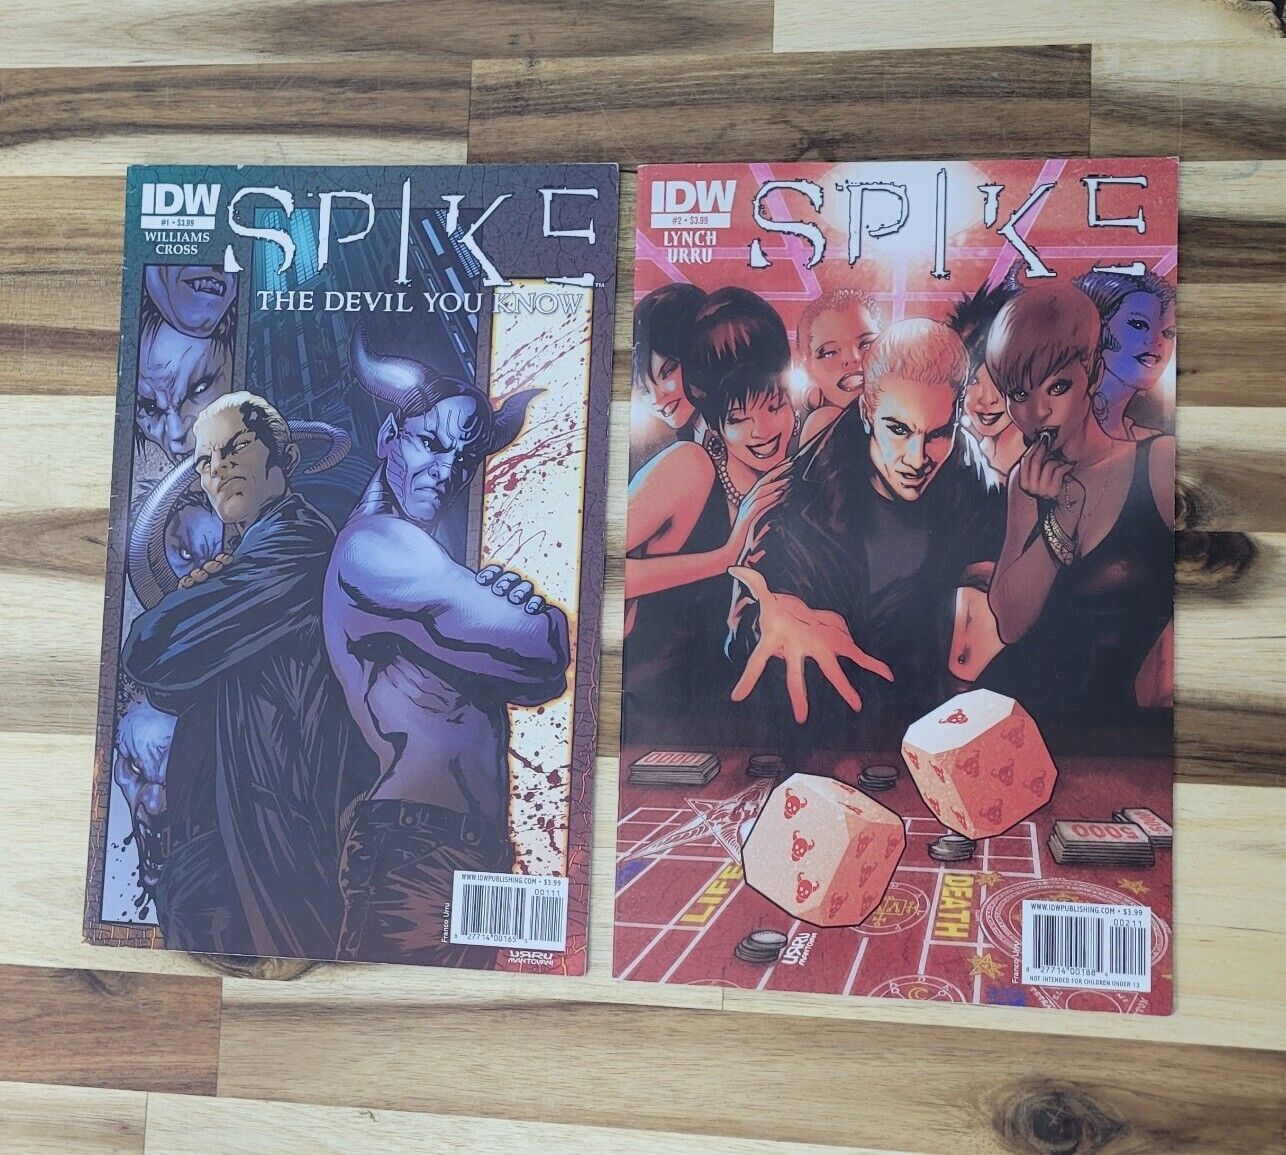 Lot of 2 SPIKE IDW COMICS #1 The Devil You Know IDW #2 What Happens in Vegas